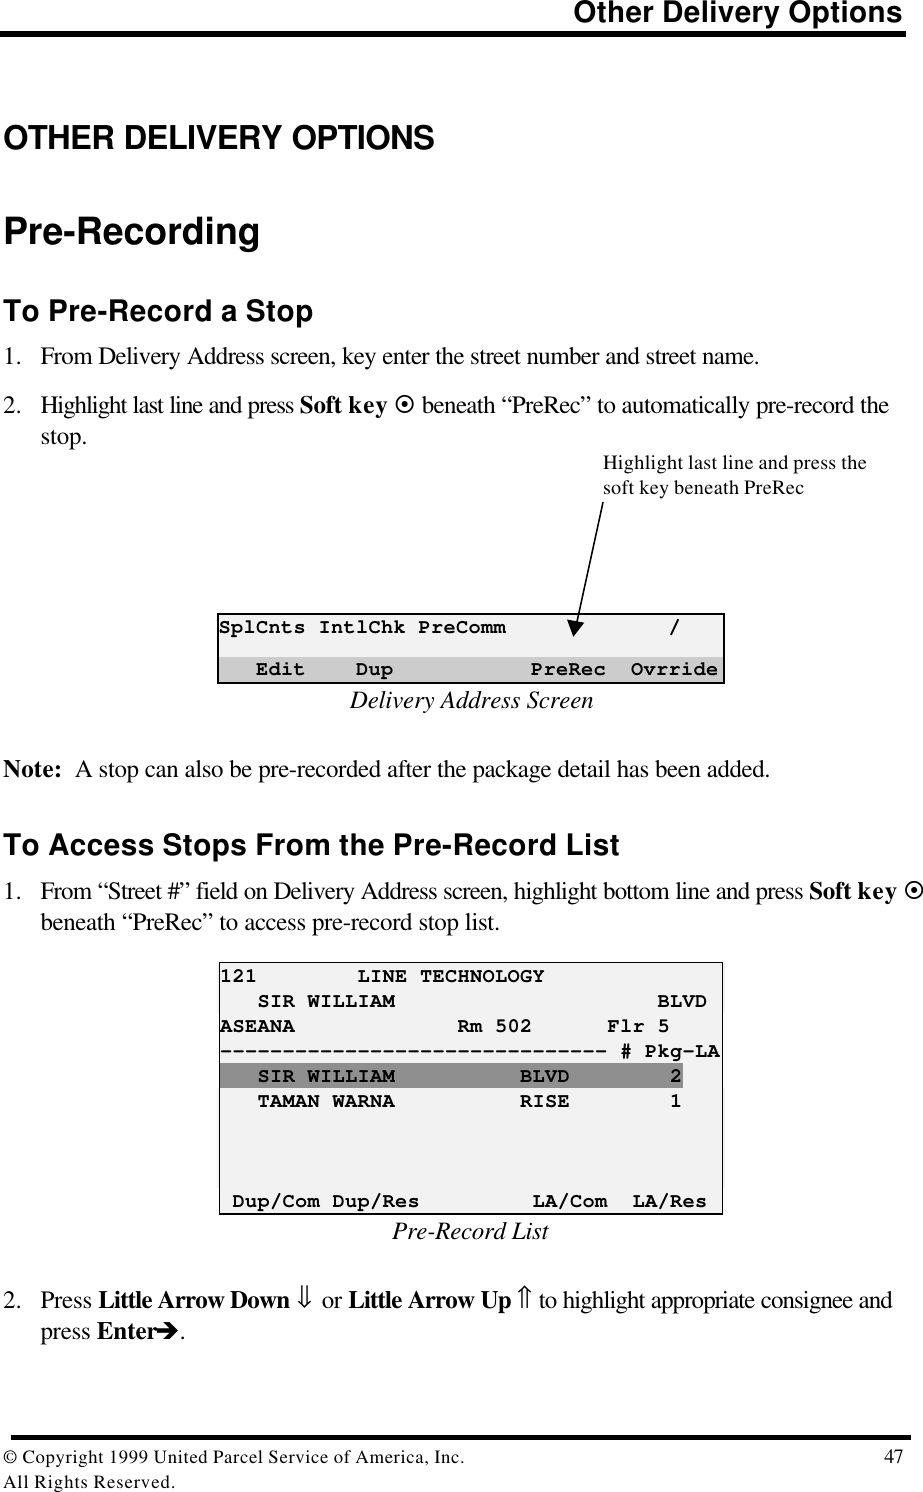                                                                          Other Delivery Options© Copyright 1999 United Parcel Service of America, Inc.  47All Rights Reserved.OTHER DELIVERY OPTIONSPre-RecordingTo Pre-Record a Stop1. From Delivery Address screen, key enter the street number and street name.2. Highlight last line and press Soft key ¤ beneath “PreRec” to automatically pre-record thestop.SplCnts IntlChk PreComm             /   Edit    Dup           PreRec  OvrrideDelivery Address ScreenNote:  A stop can also be pre-recorded after the package detail has been added.To Access Stops From the Pre-Record List1. From “Street #” field on Delivery Address screen, highlight bottom line and press Soft key ¤beneath “PreRec” to access pre-record stop list.121        LINE TECHNOLOGY   SIR WILLIAM                     BLVDASEANA             Rm 502      Flr 5------------------------------- # Pkg-LA   SIR WILLIAM          BLVD        2   TAMAN WARNA          RISE        1 Dup/Com Dup/Res         LA/Com  LA/ResPre-Record List2. Press Little Arrow Down ⇓ or Little Arrow Up ⇑ to highlight appropriate consignee andpress Enterè.Highlight last line and press thesoft key beneath PreRec